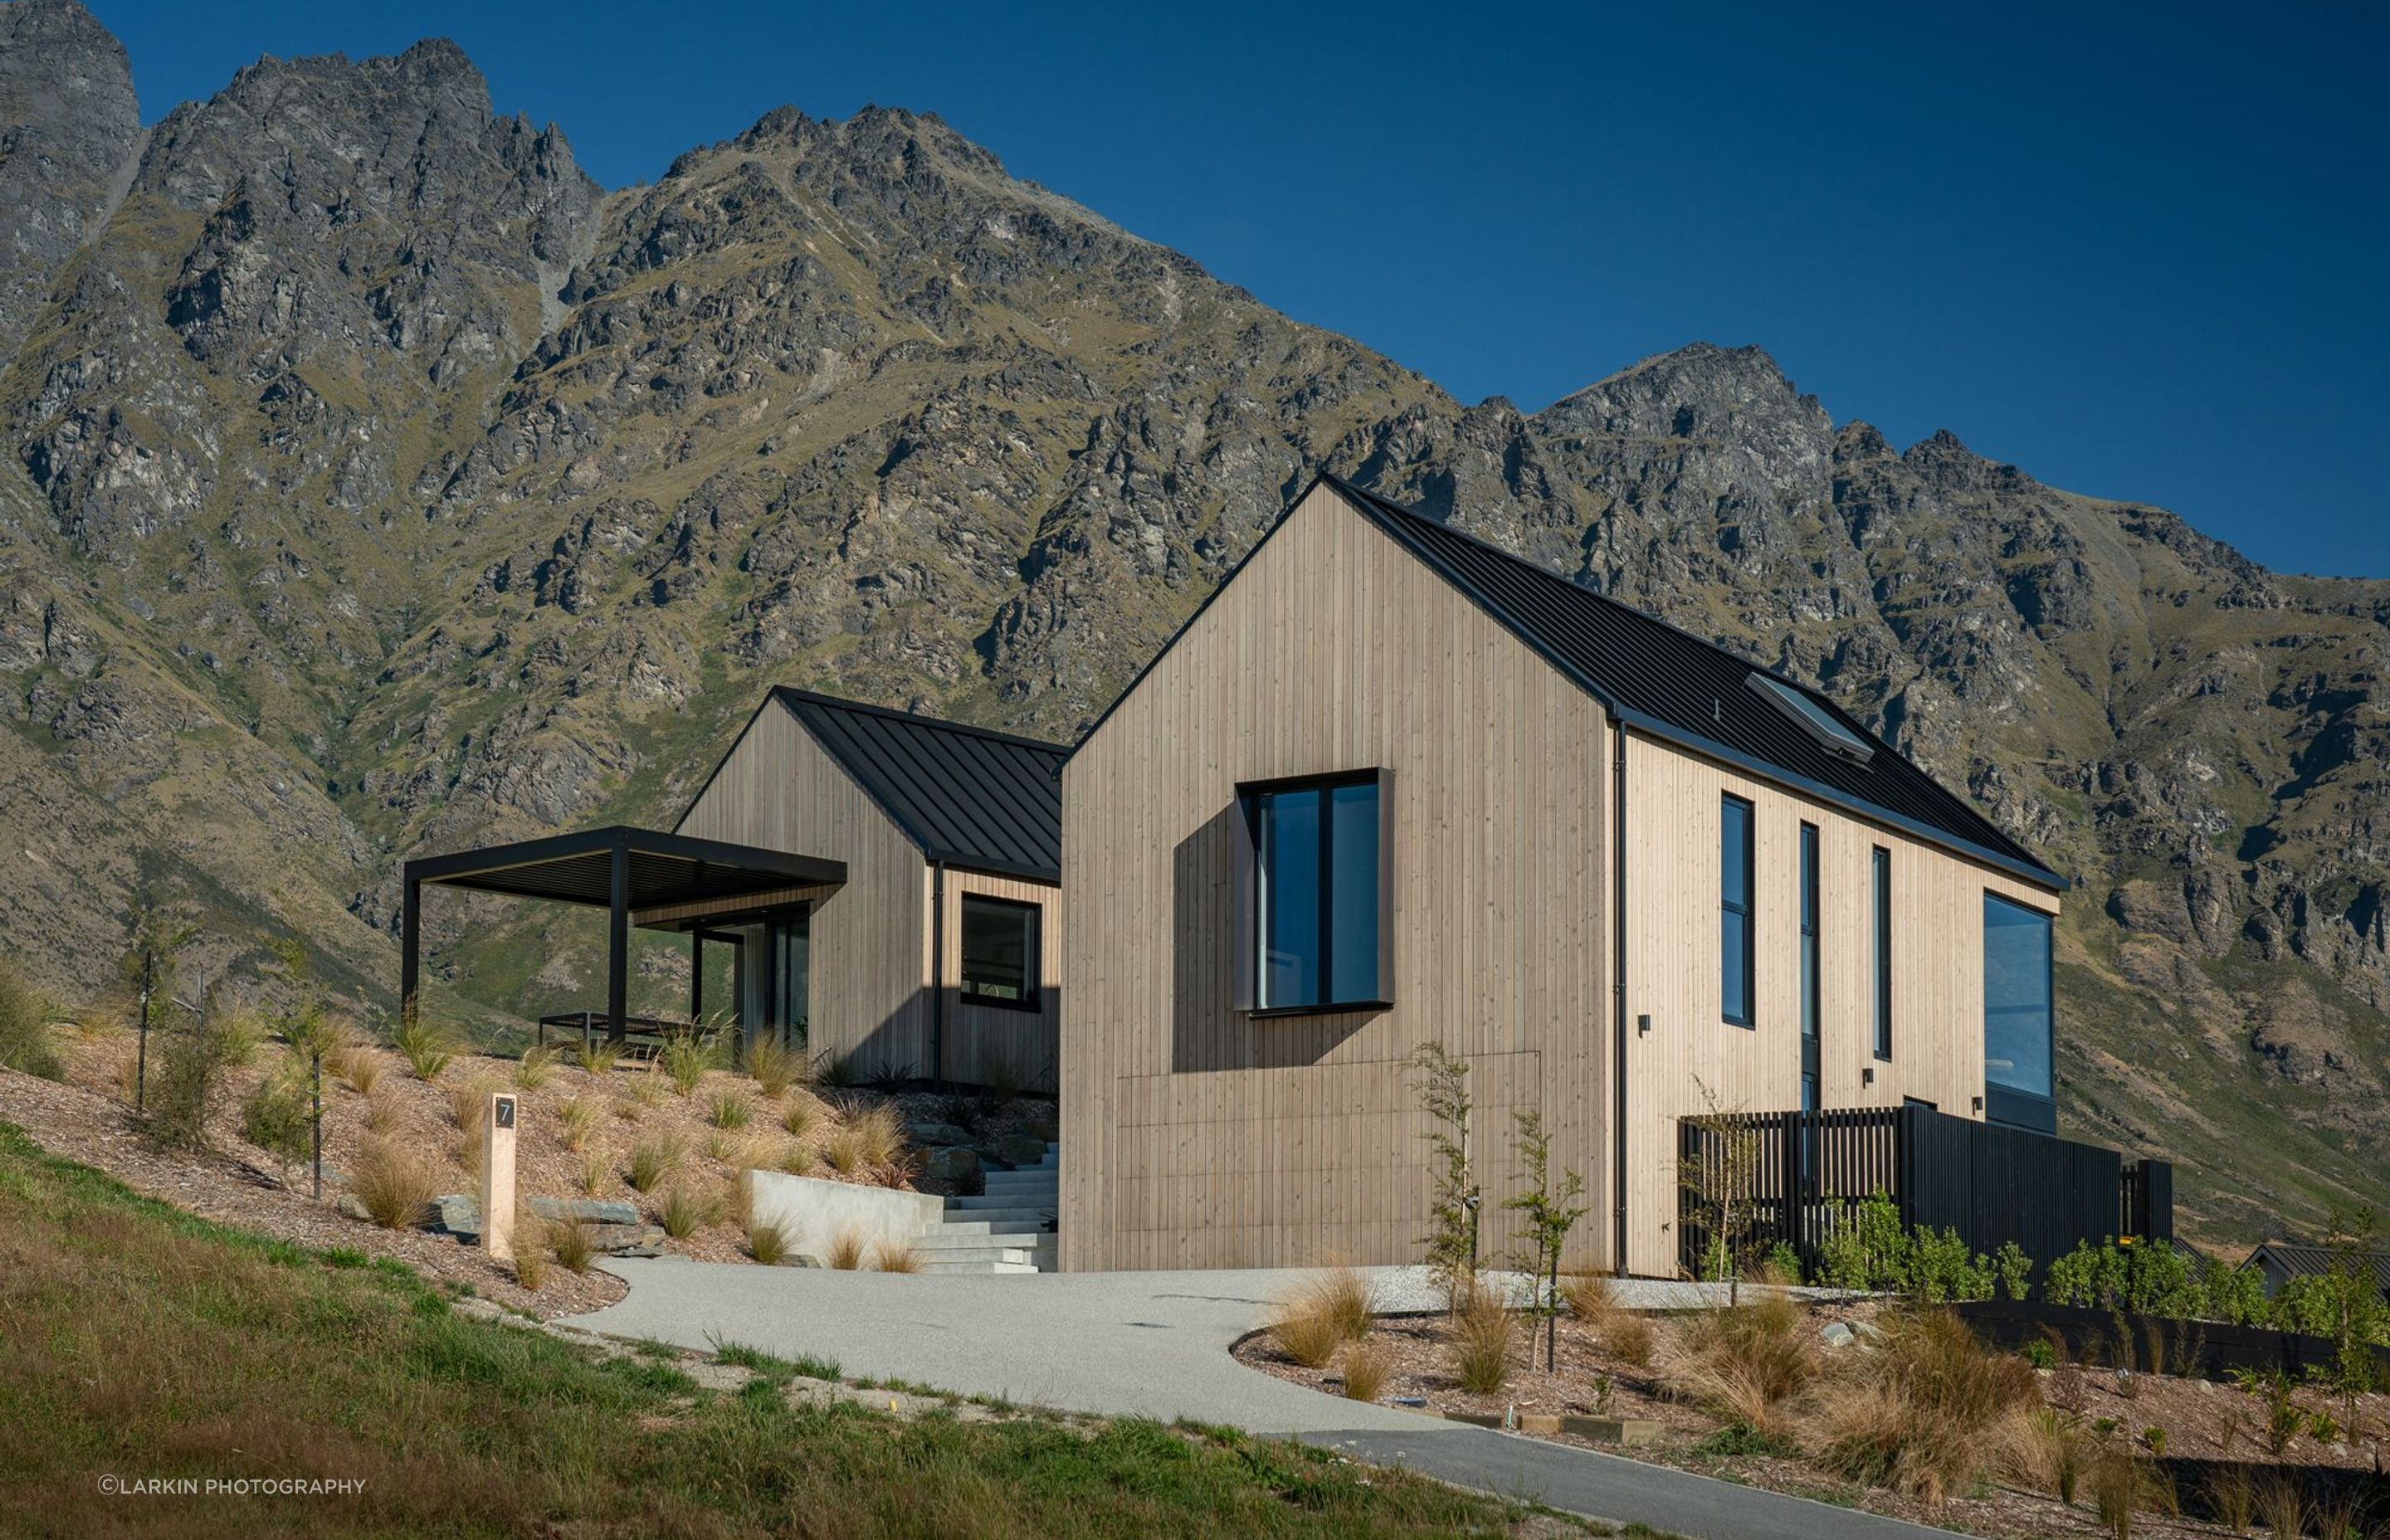 The Remarkables provide a magnificent backdrop to the home, whose gable roof profiles immitate the ridges of the mountains.